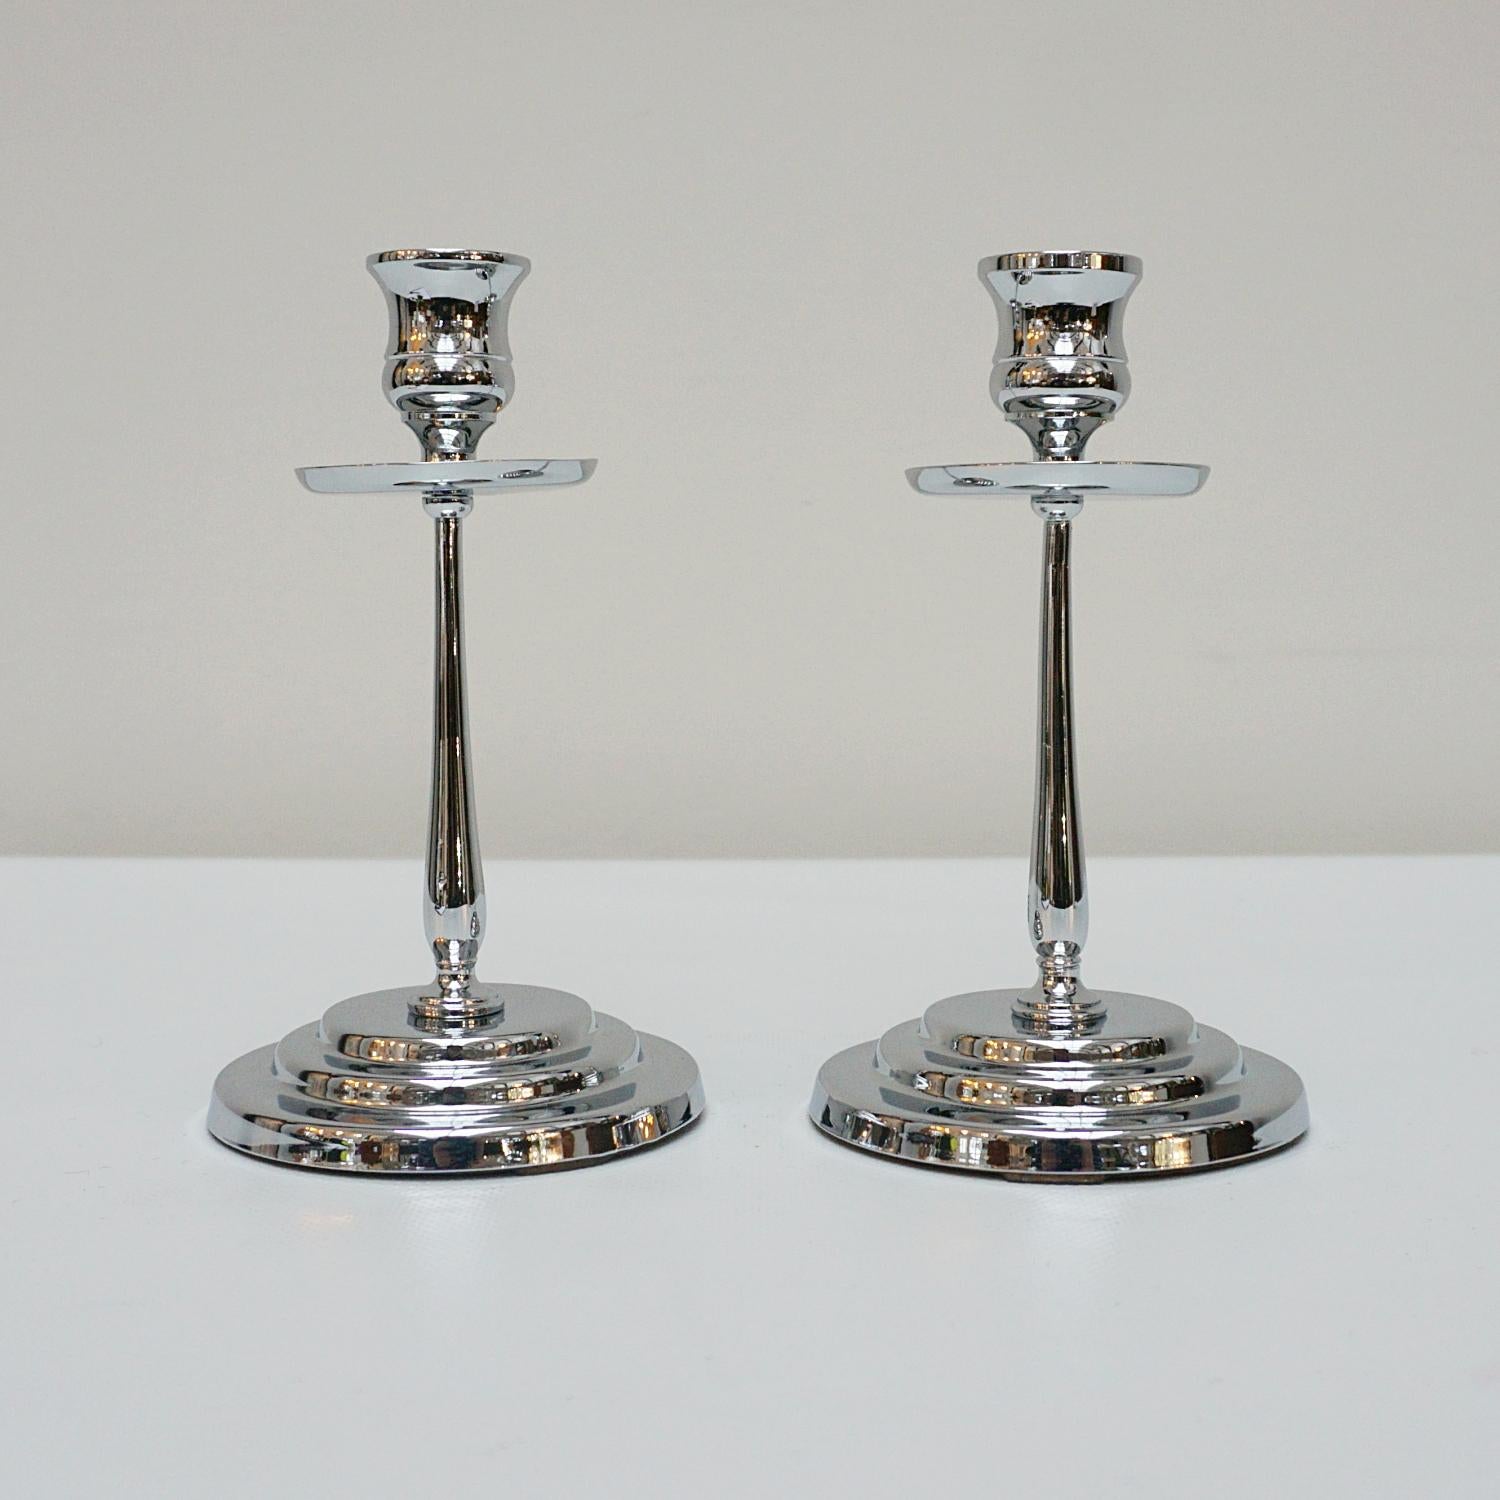 A pair of Art Deco candlesticks. A chromed slender stem. Set over a rounded with stepped chromed metal base with chromed metal top. 

Dimensions: H 18cm W 10cm

Origin: English

Date: Circa 1935

Item Number: 2710236

Re-chromed and polished with